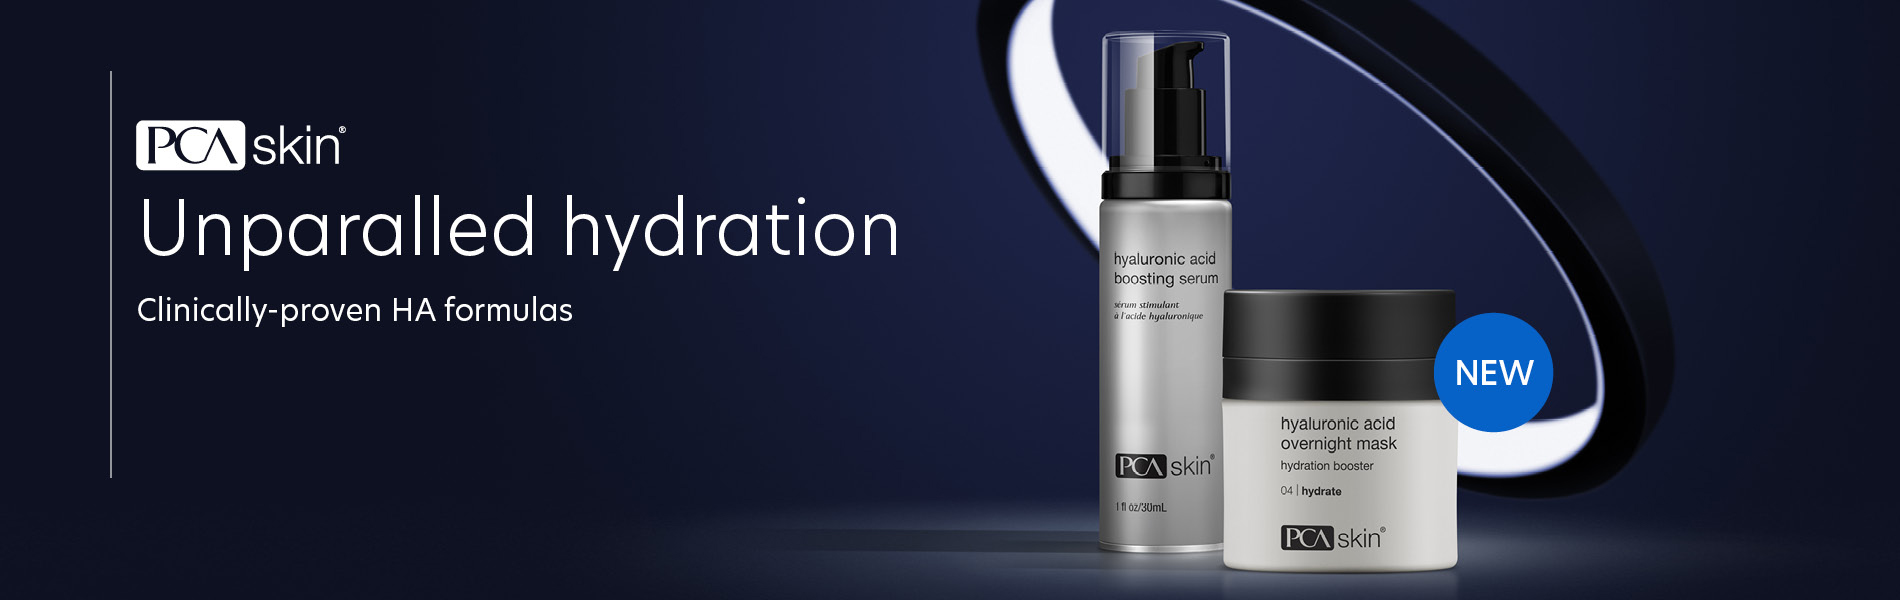 PCA Skin - Unparalleled hydration